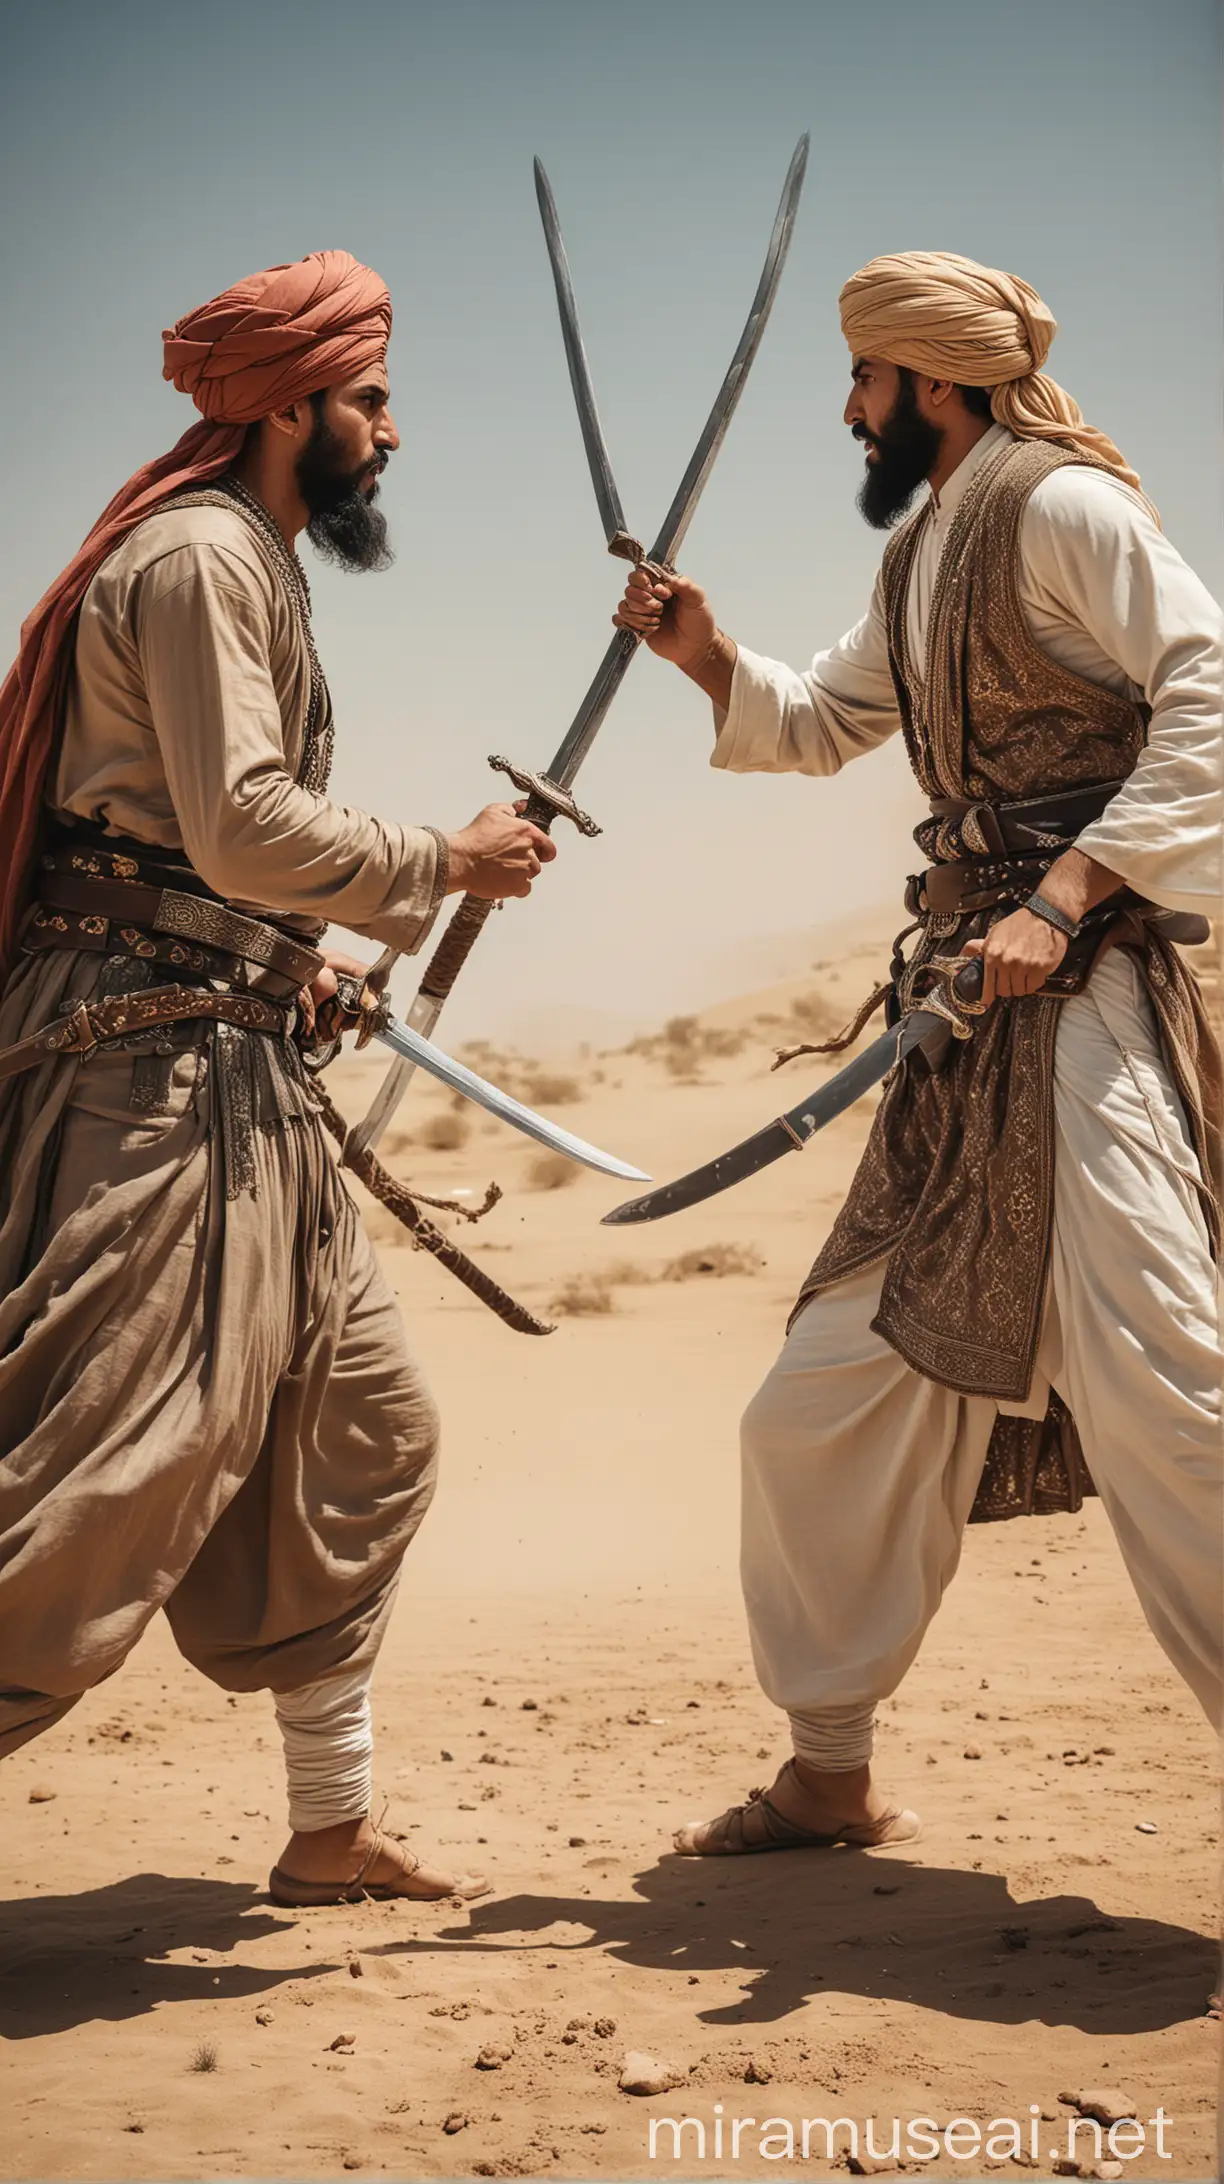 Two Man fighting with eachother ,similar to each other  in the  mirror ,holding sword in his hand like in a battle field, wearing arabic turban and long dress of Arabs , style like a painting